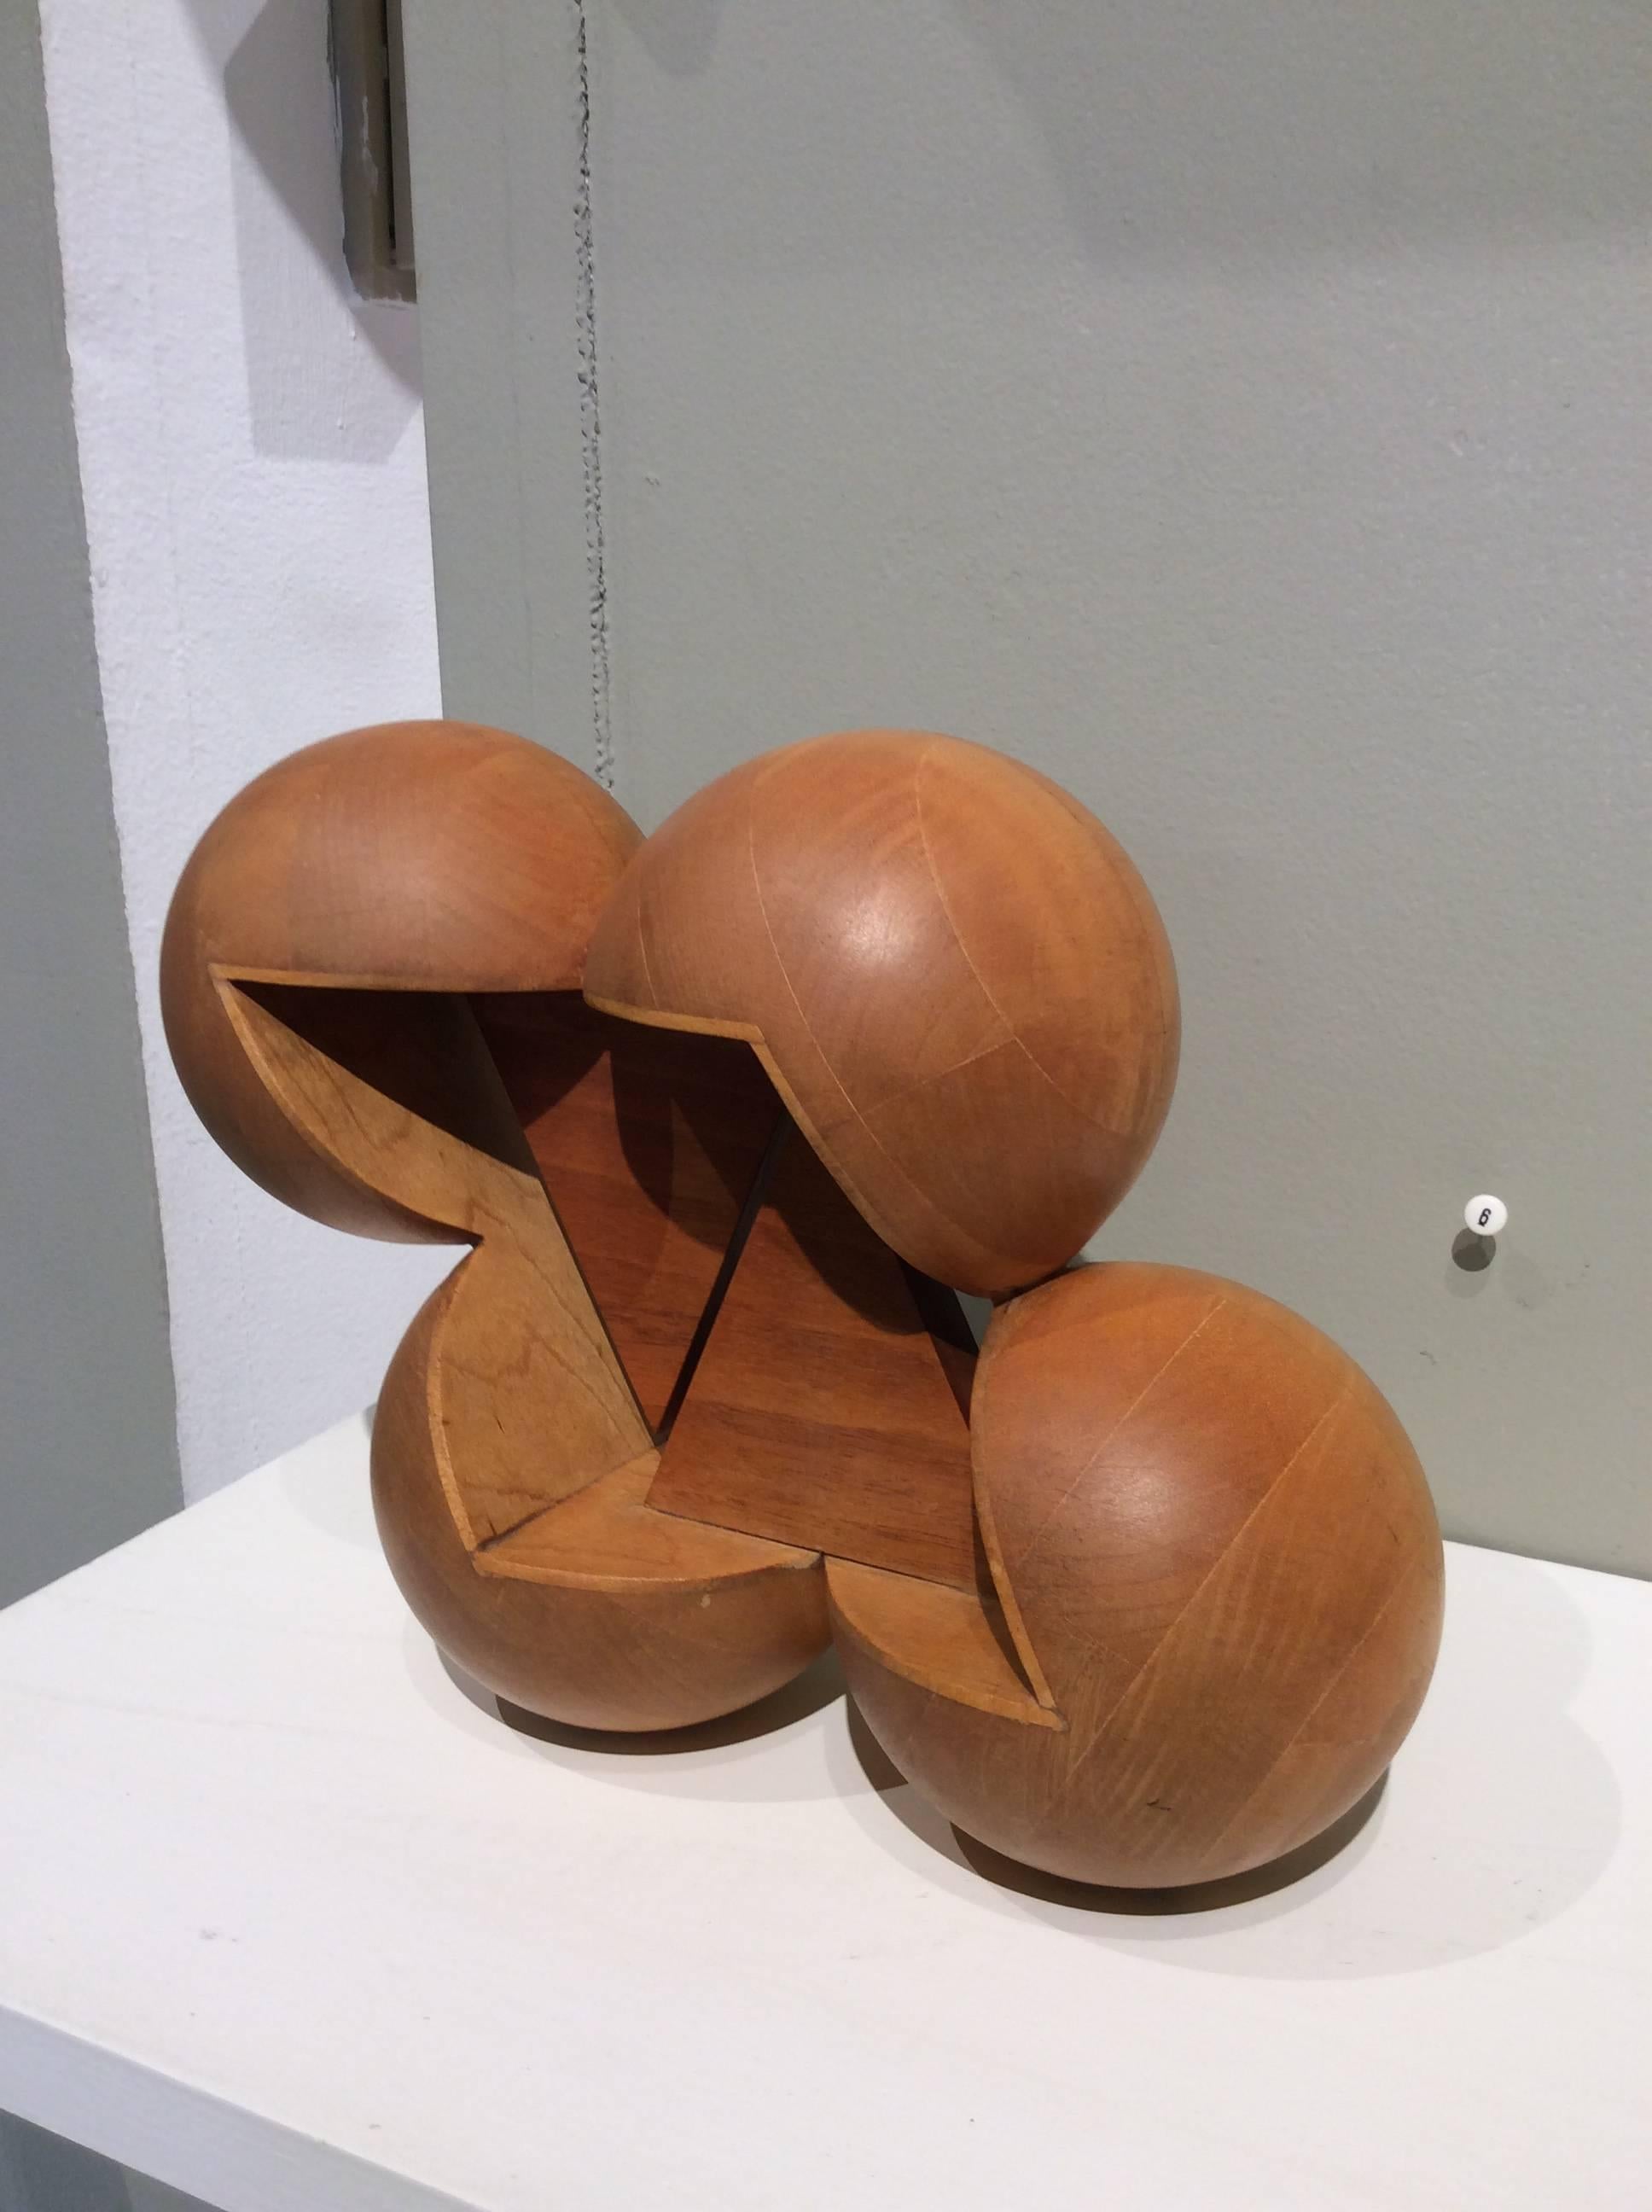 Fair Ball (Abstract Mid Century Modern Inspired Small Wooden Tabletop Sculpture) 2